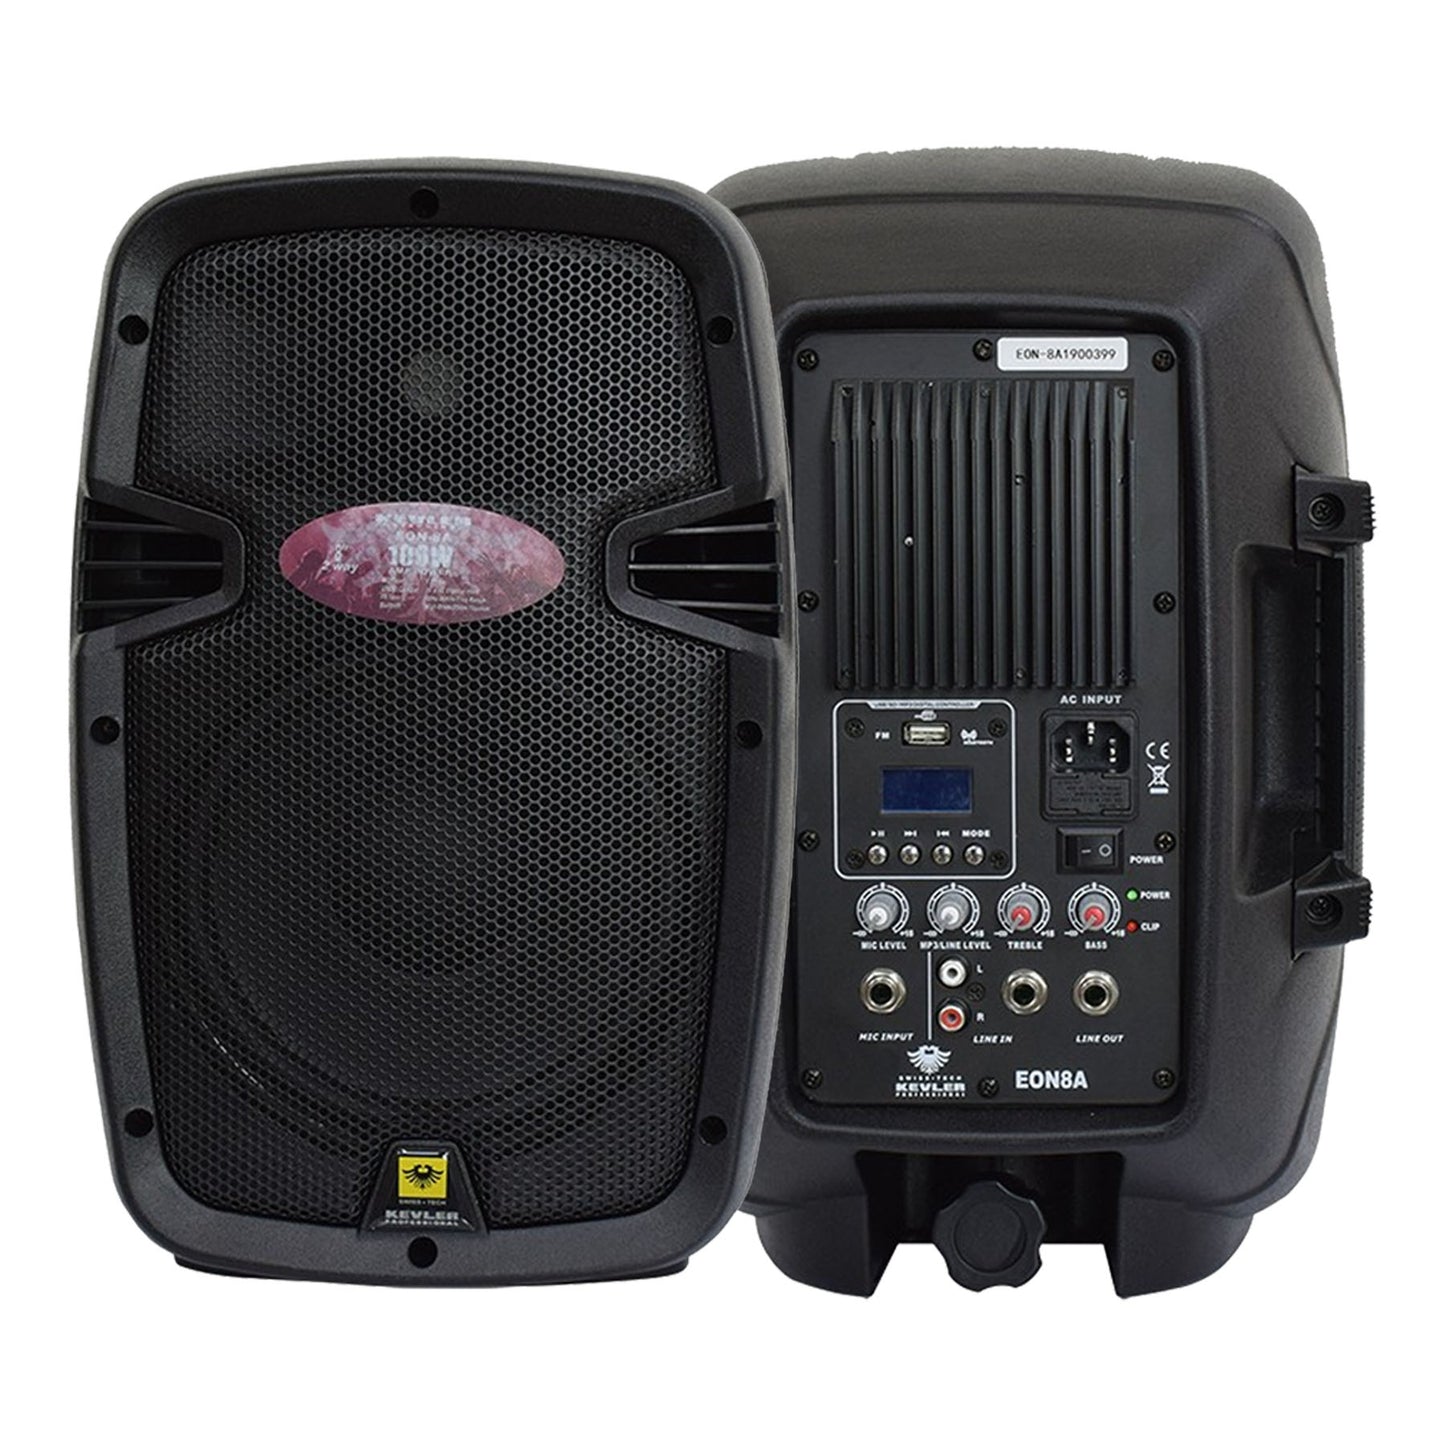 KEVLER EON-8A 8" 200W 2-way Full Range Active Loud Speaker (Pair) with LCD Display and Class D Amplifier, Built-In USB Port / FM / Bluetooth Function, RCA Input and 3 Mic Line I/O